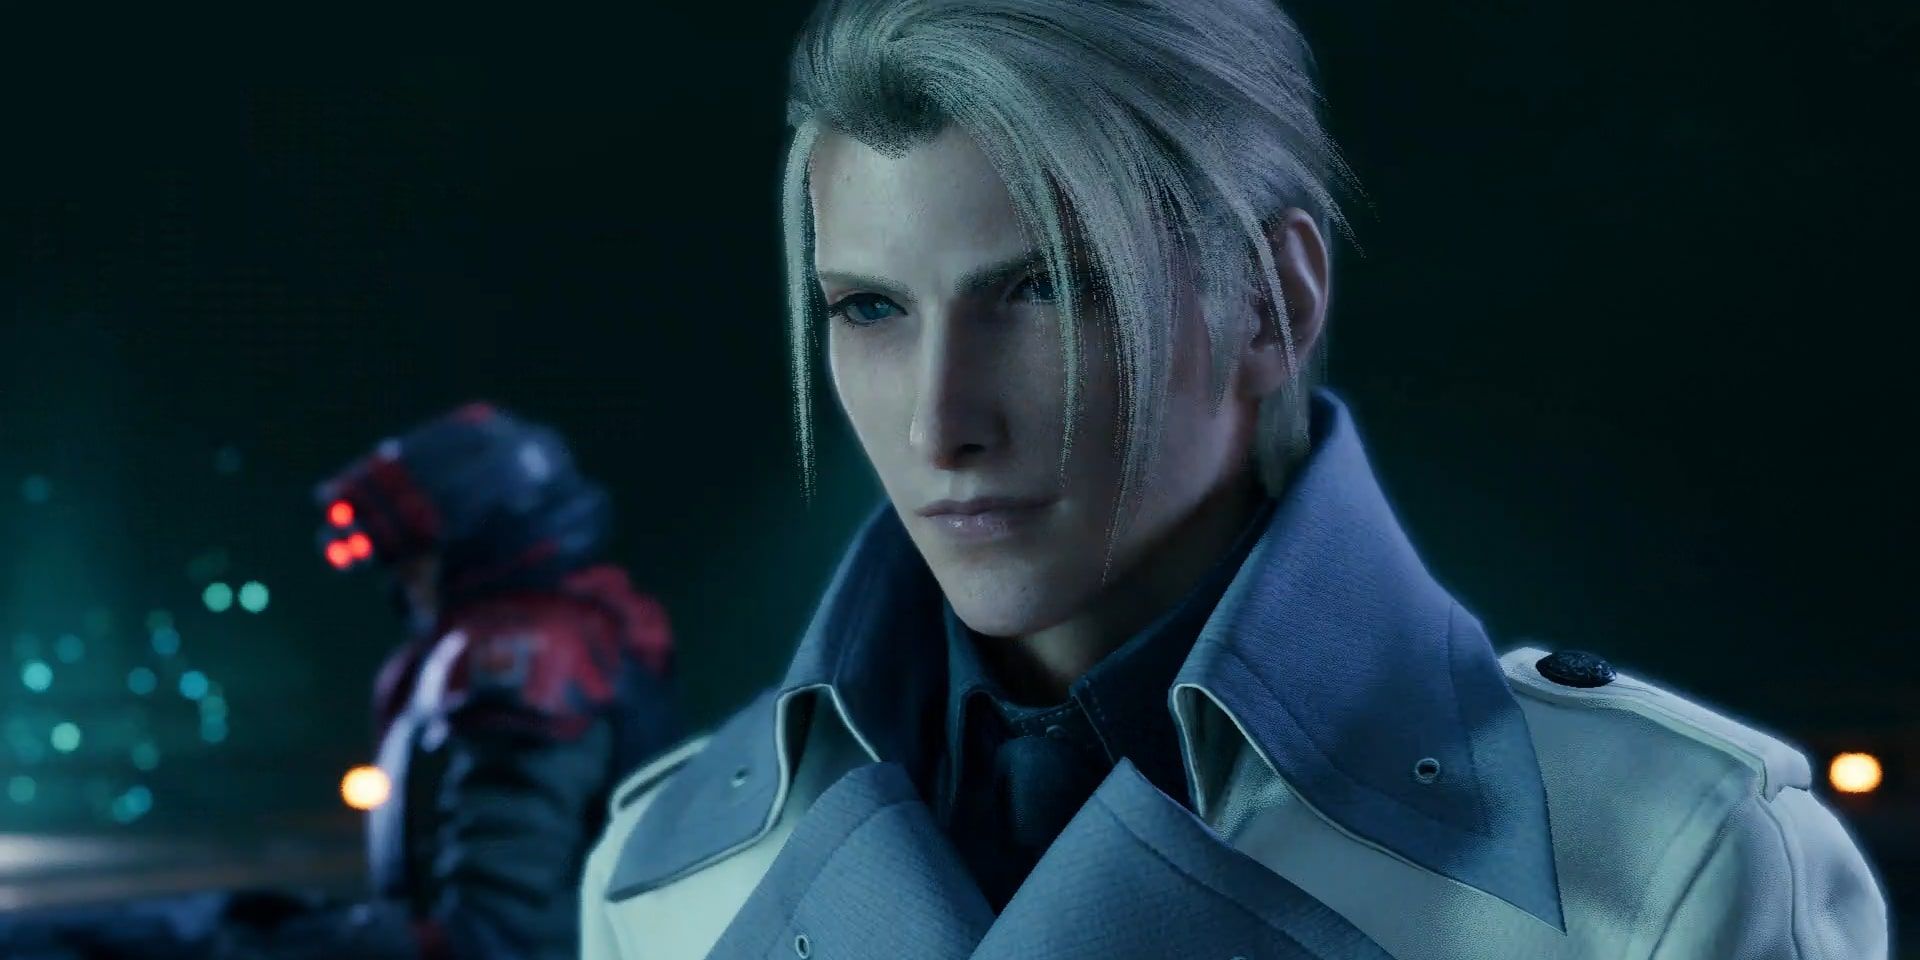 rufus shinra close up from FF7 Remake